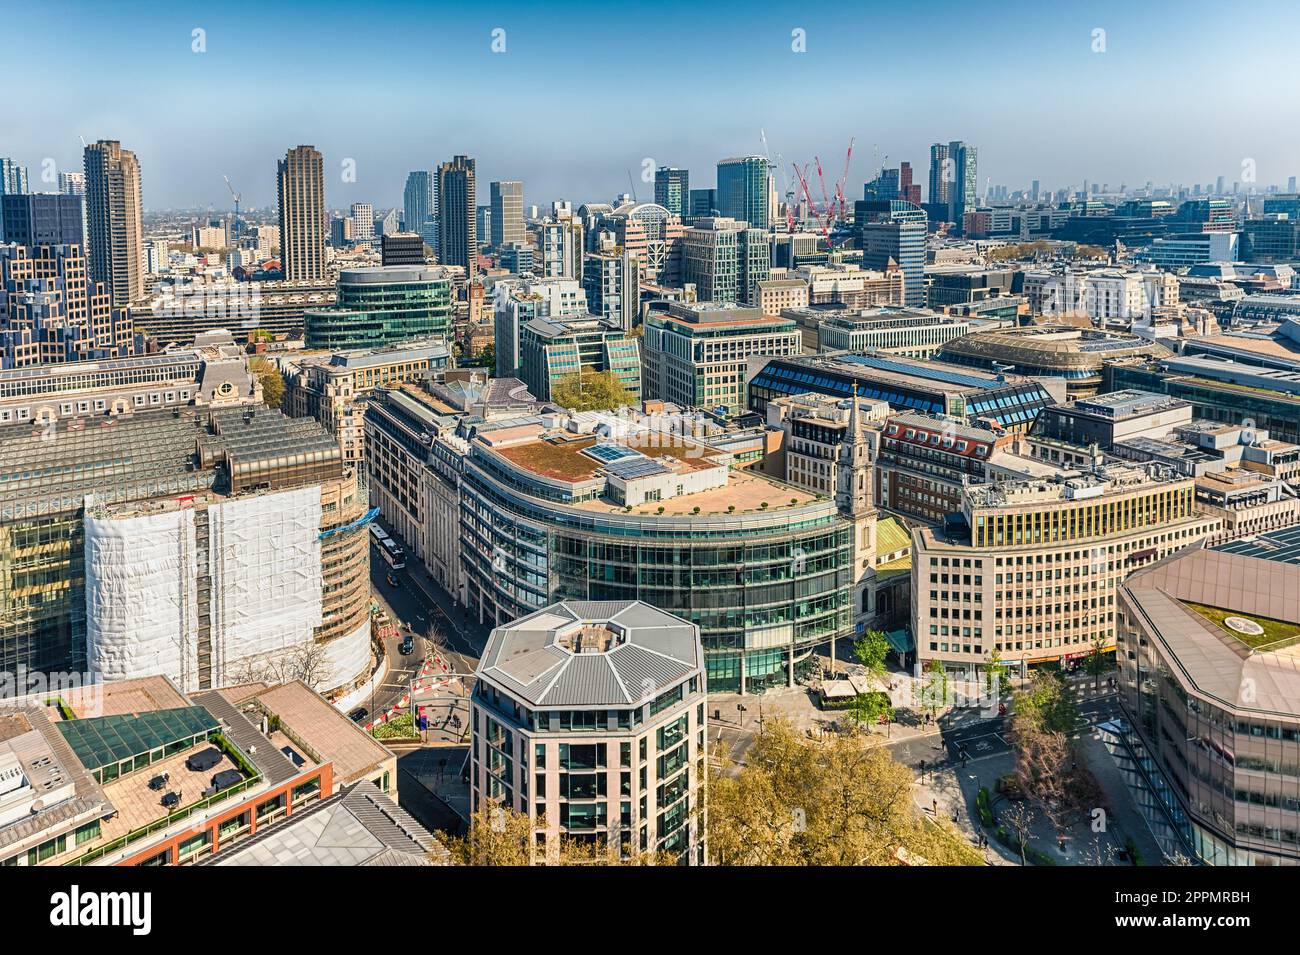 Aerial view with the city skyline of London, England, UK Stock Photo